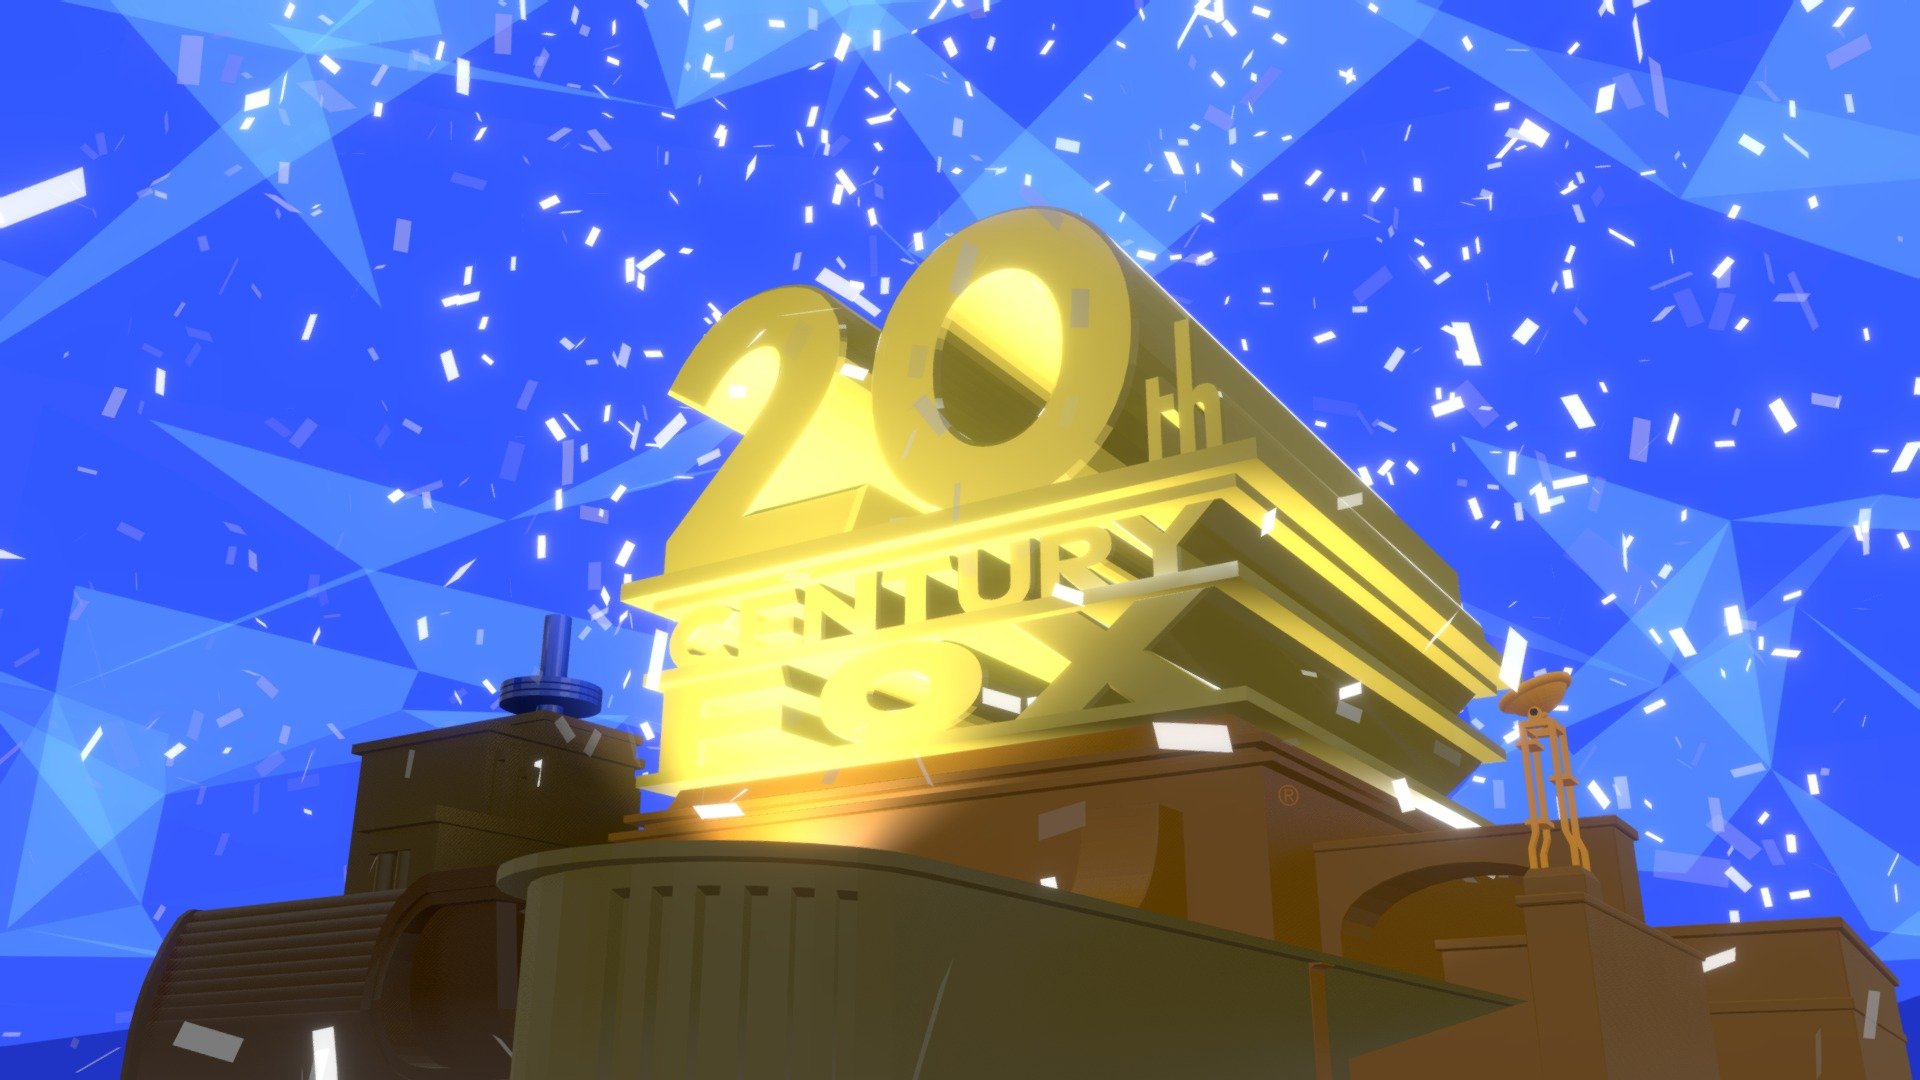 20th Century Fox 1935 Logo Style 1994 (model by iceponey and